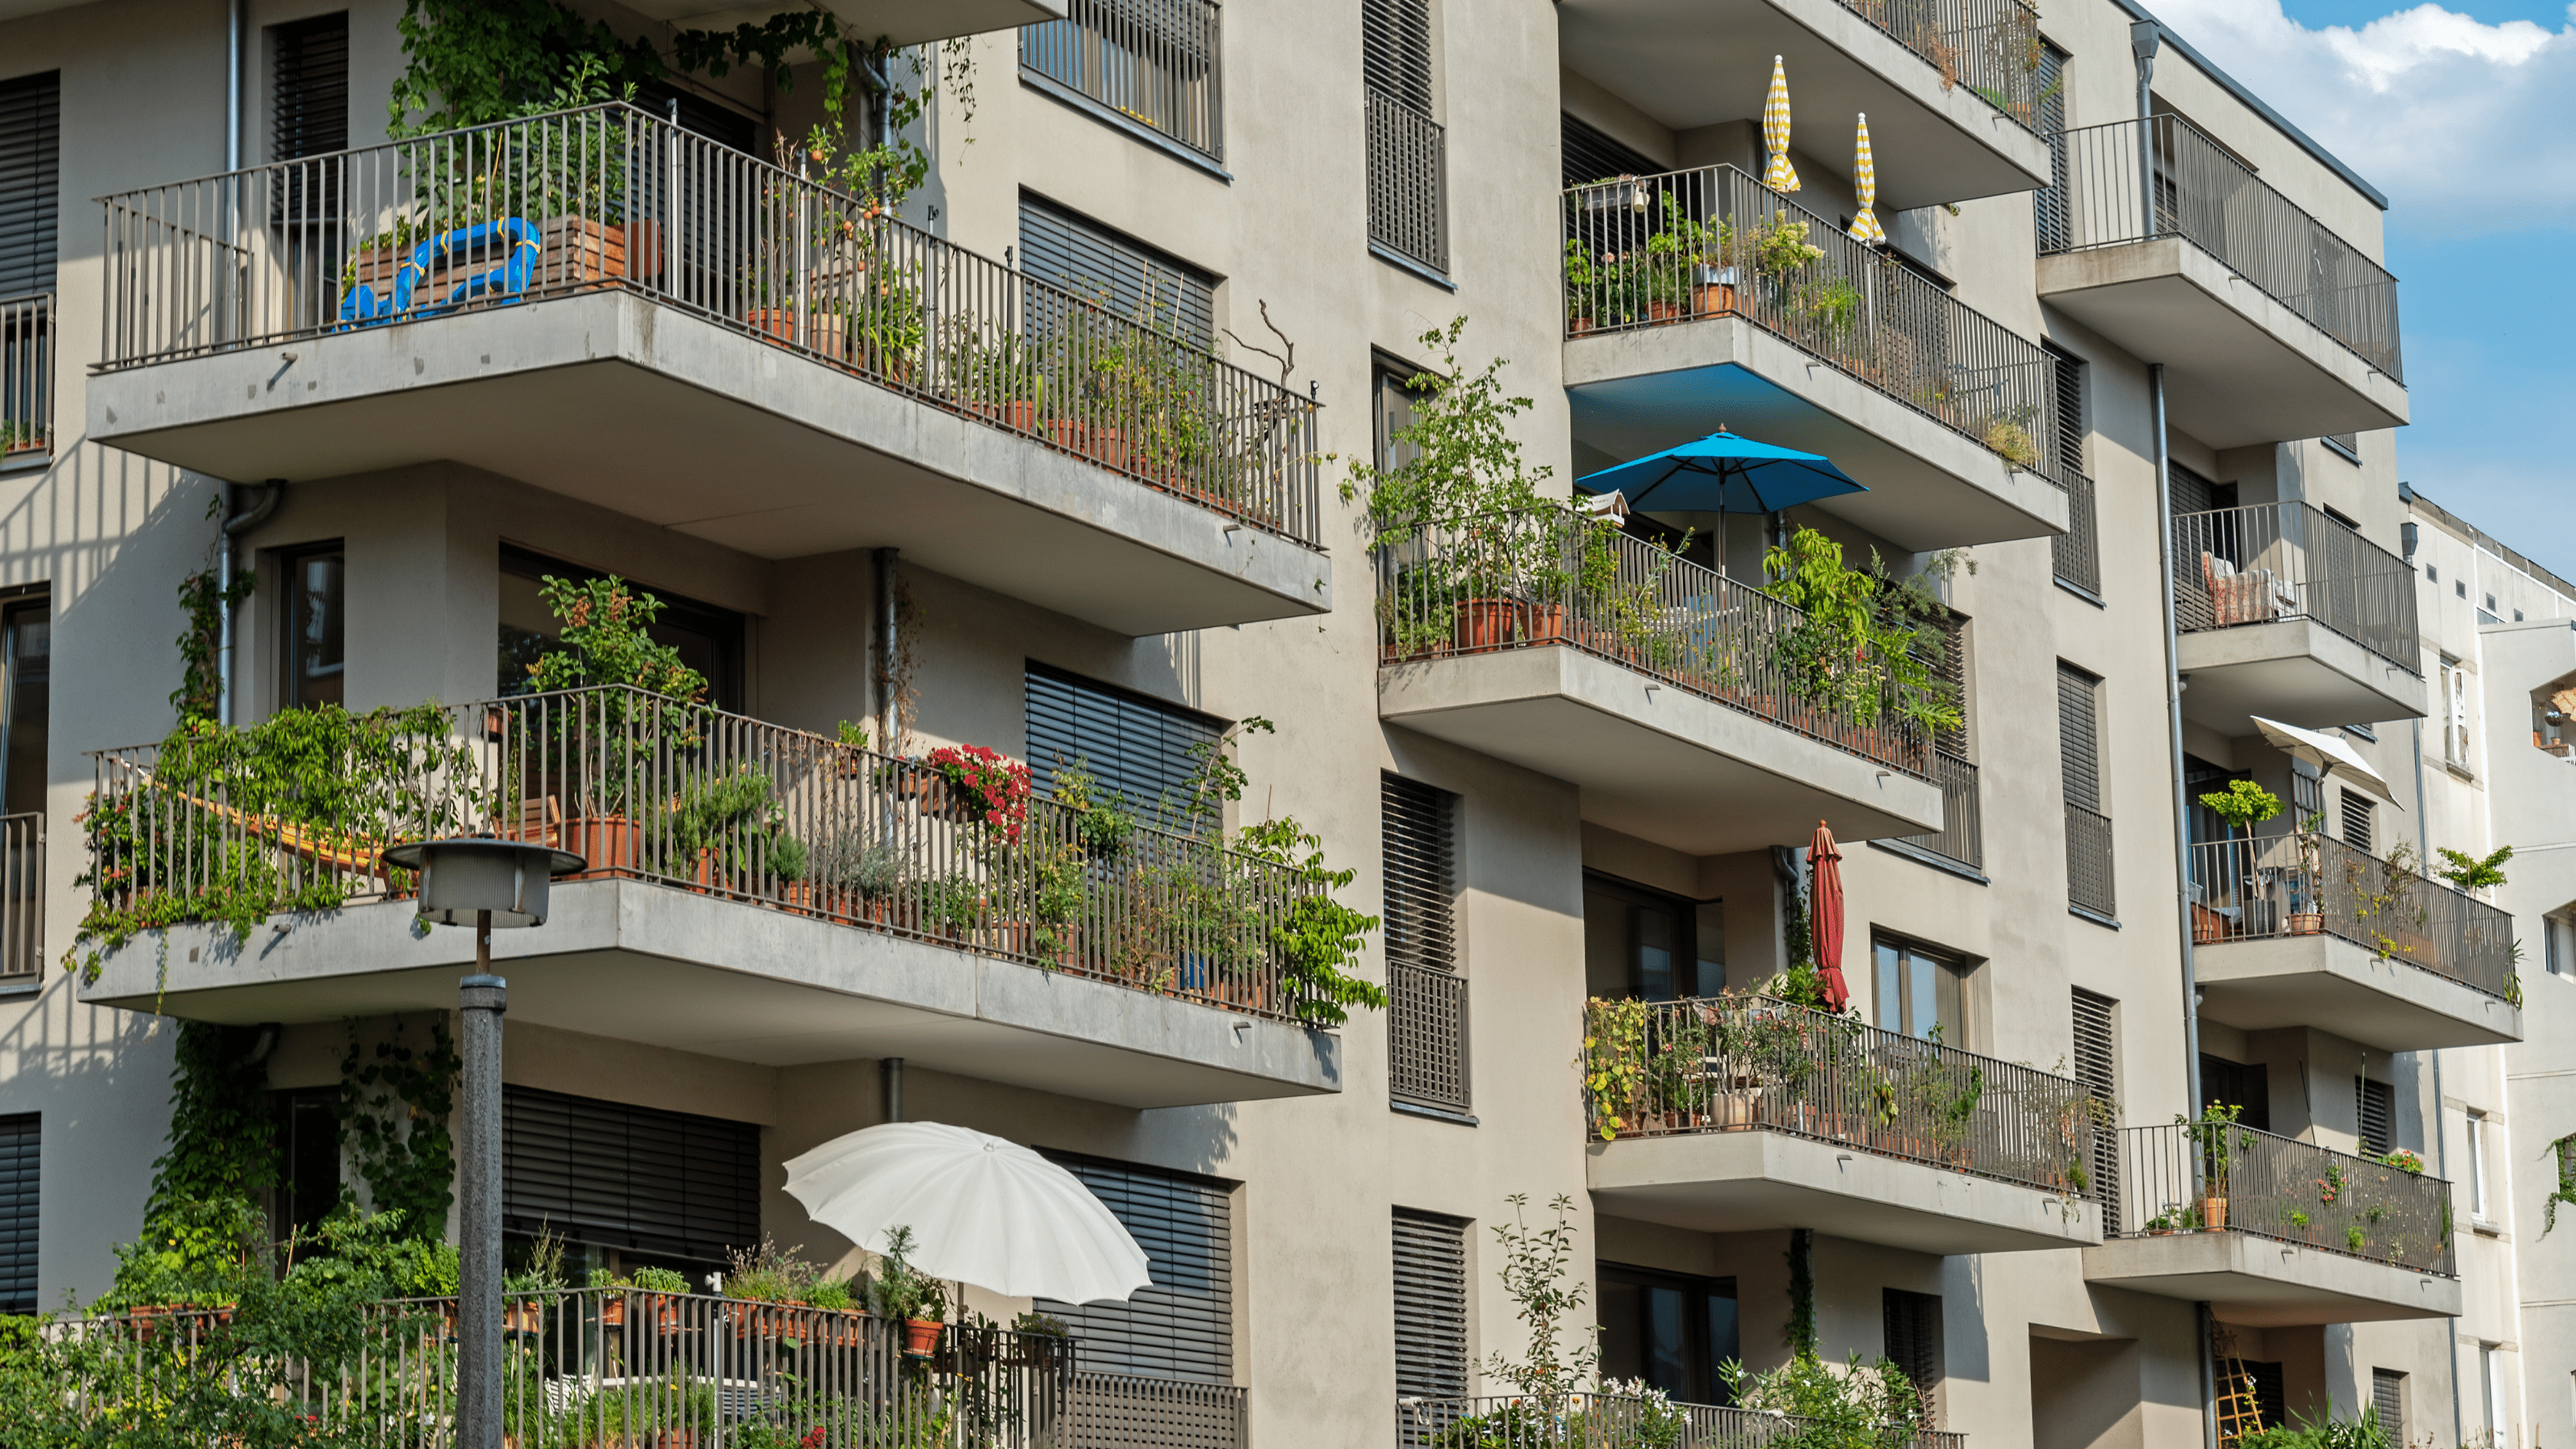 4 Crucial Factors to Consider When Underwriting a Multifamily Property